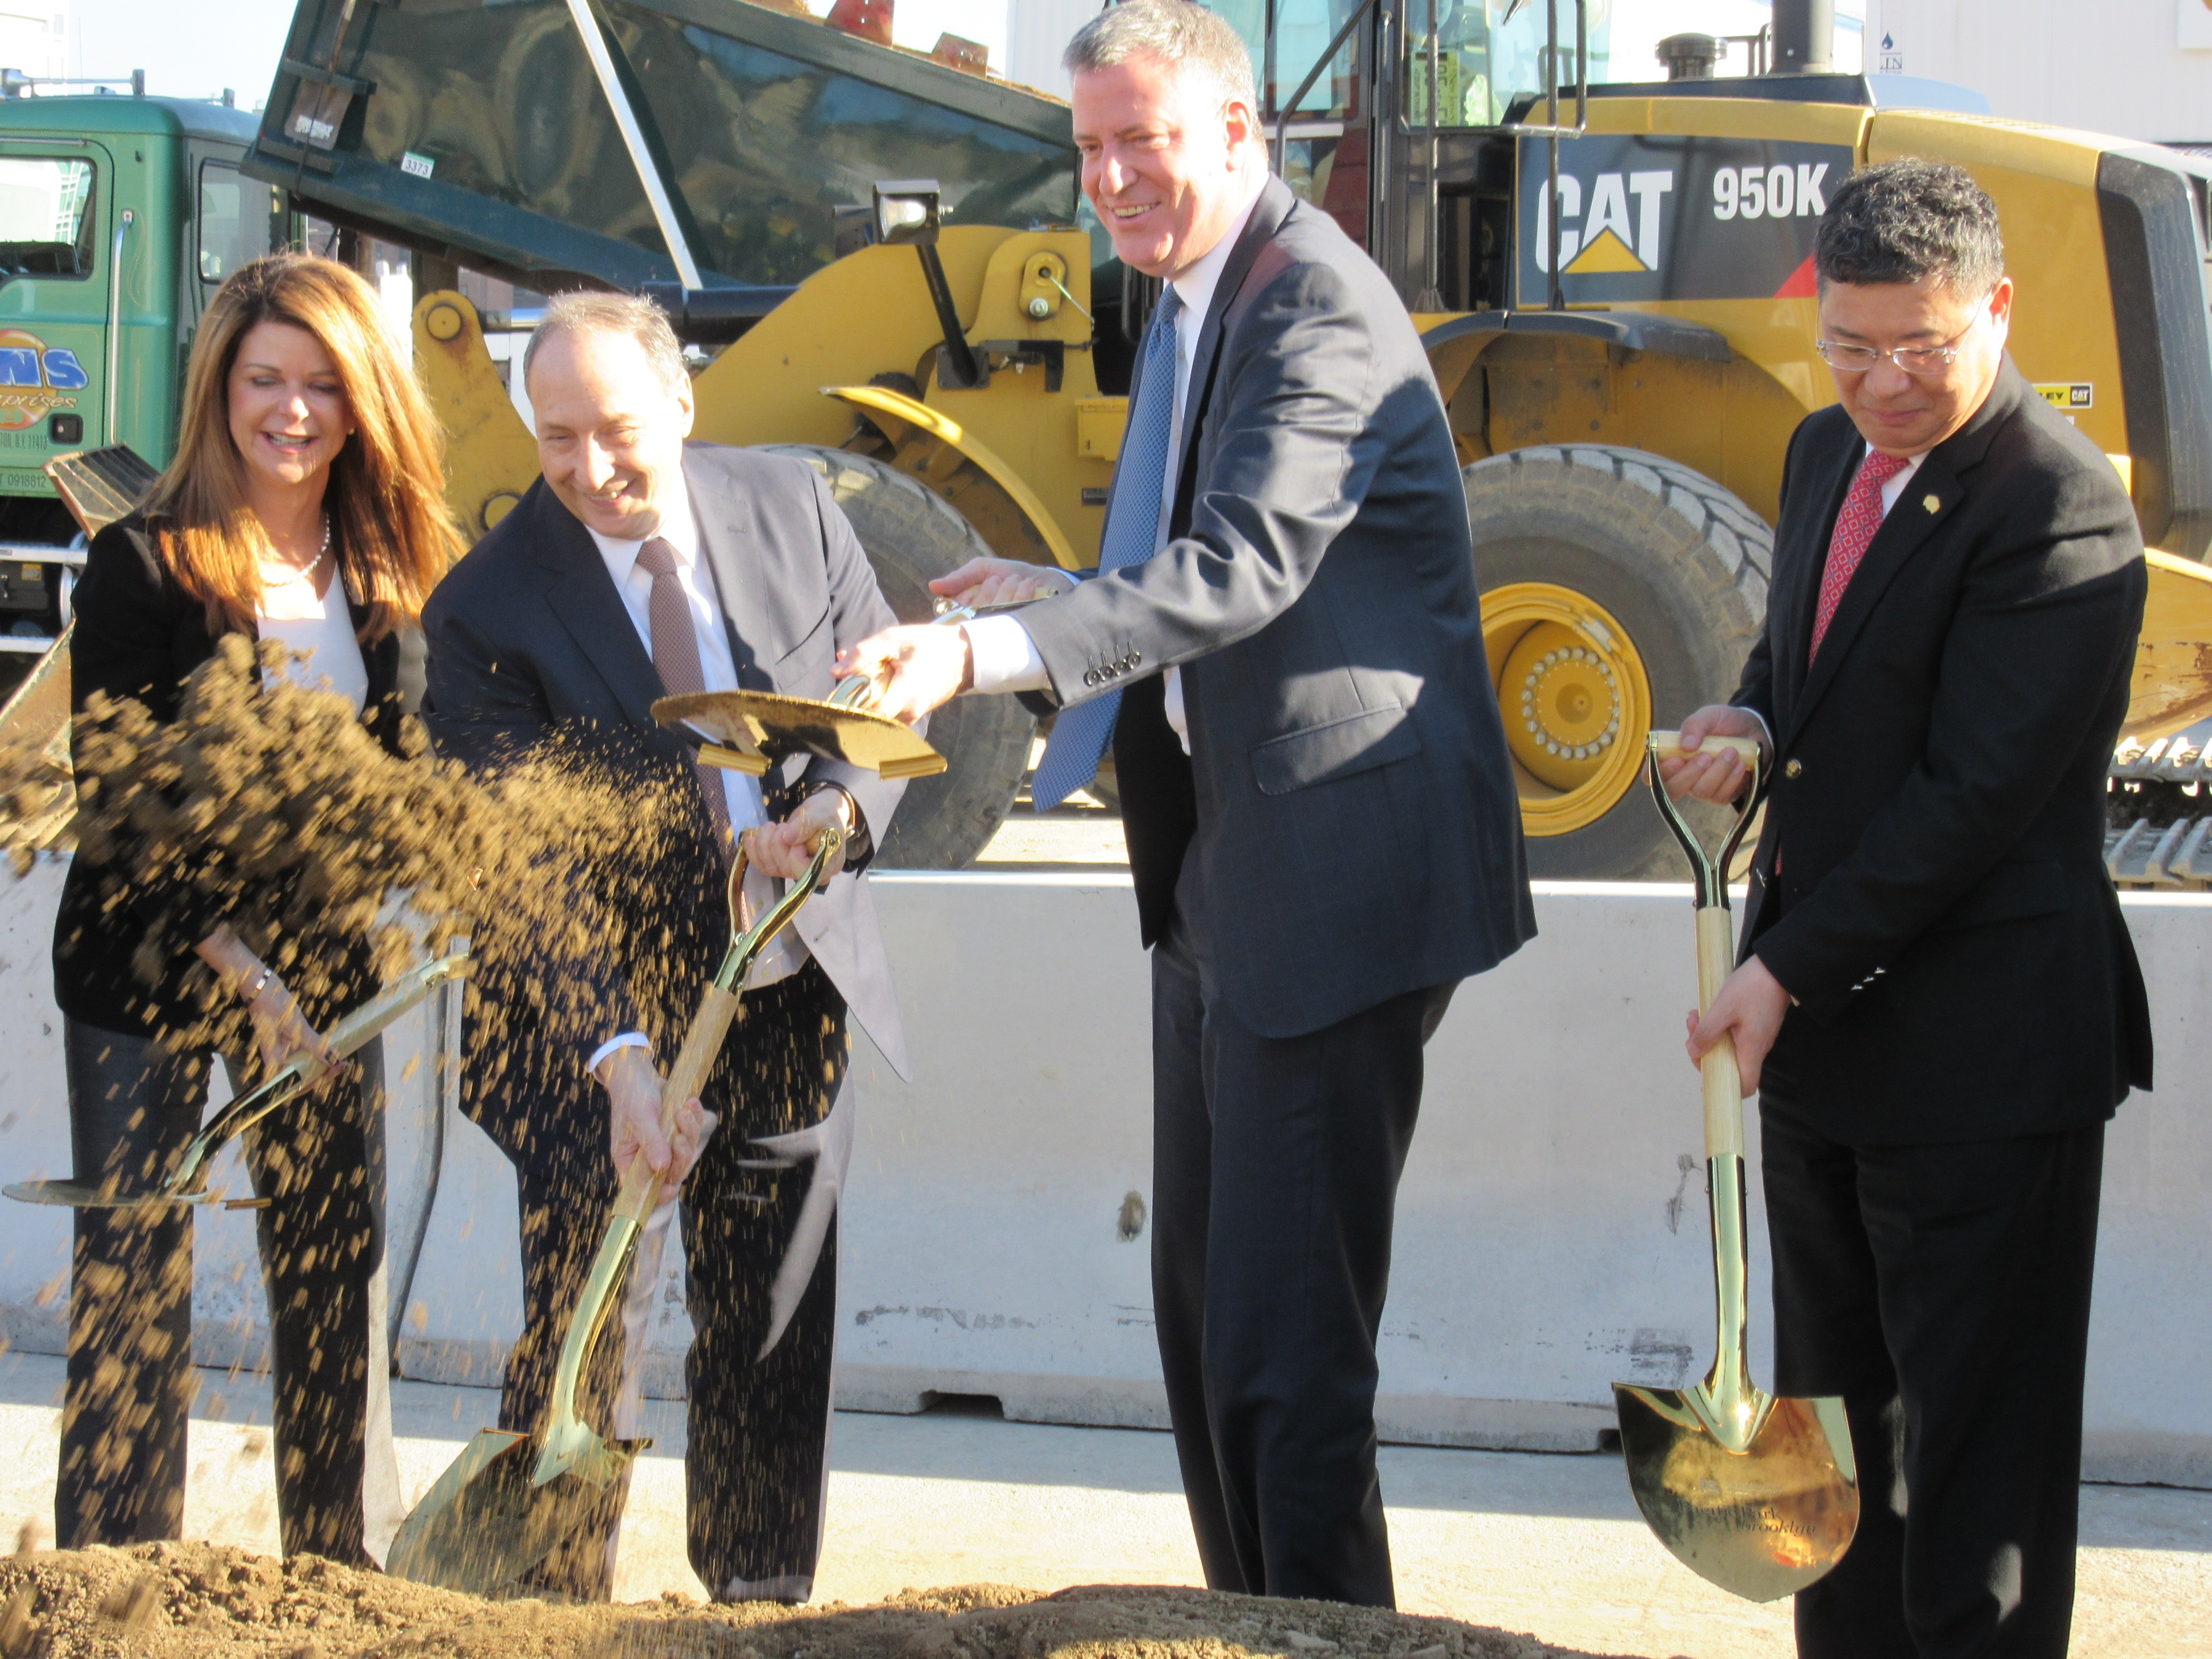 Mayor Bill de Blasio shovels dirt with top executives from Forest City Ratner and Greenland Group (Photo: Will Bredderman).